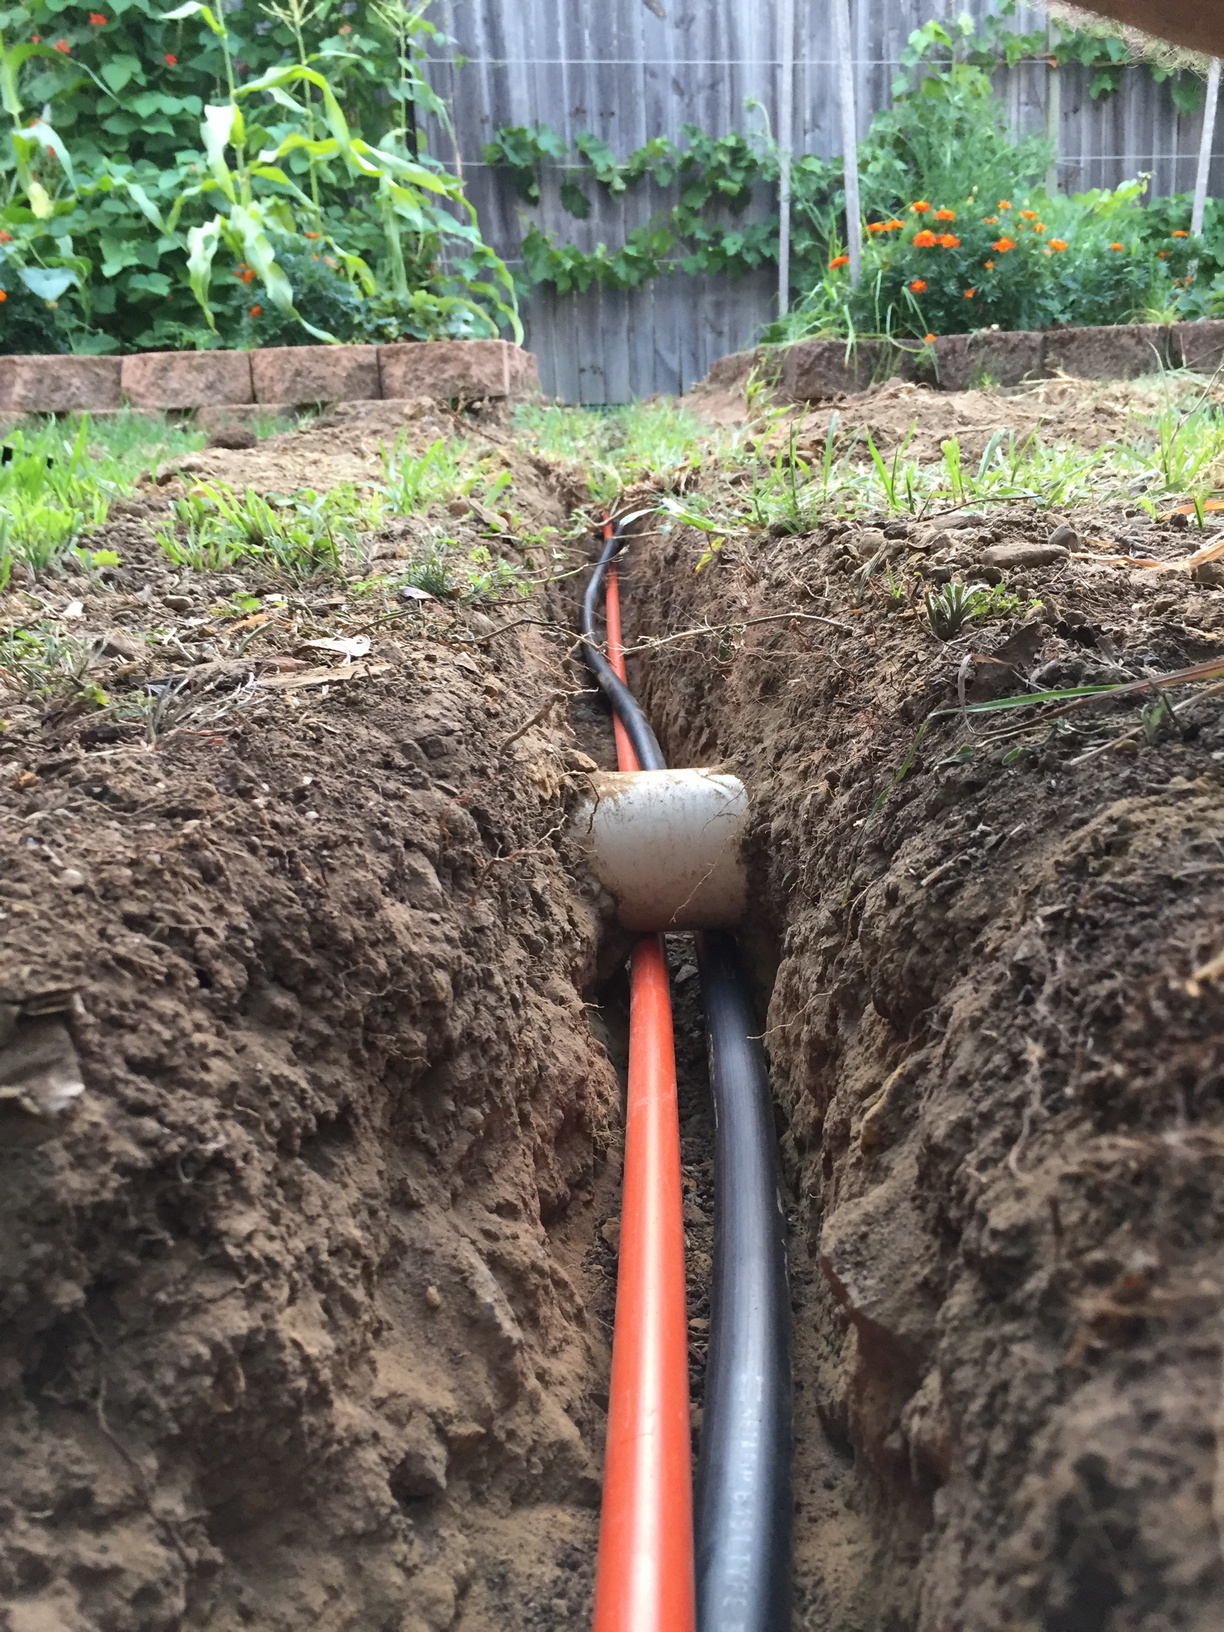 Conduit running underneath a storm-water pipe. Glad I didn't dig through that!